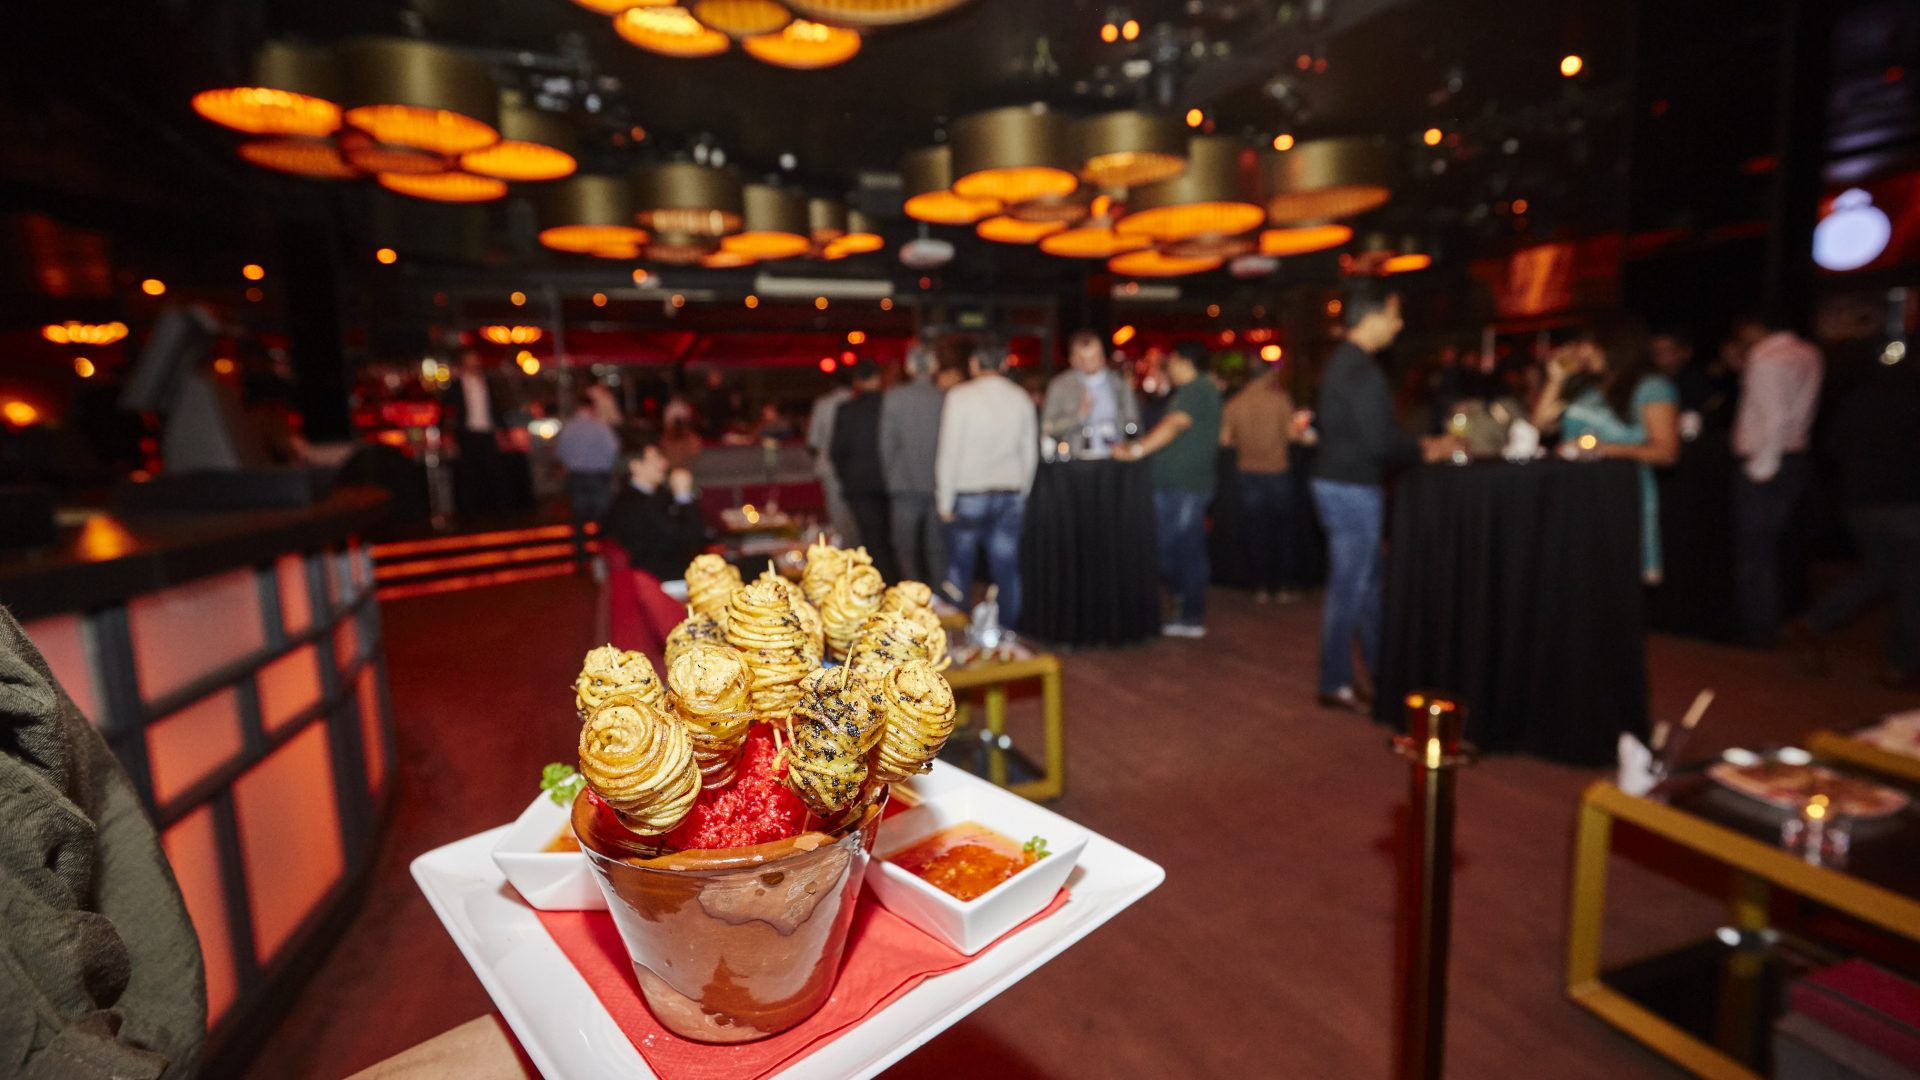 Snacks being served at the evening party for Karix' clients during MWC 2019